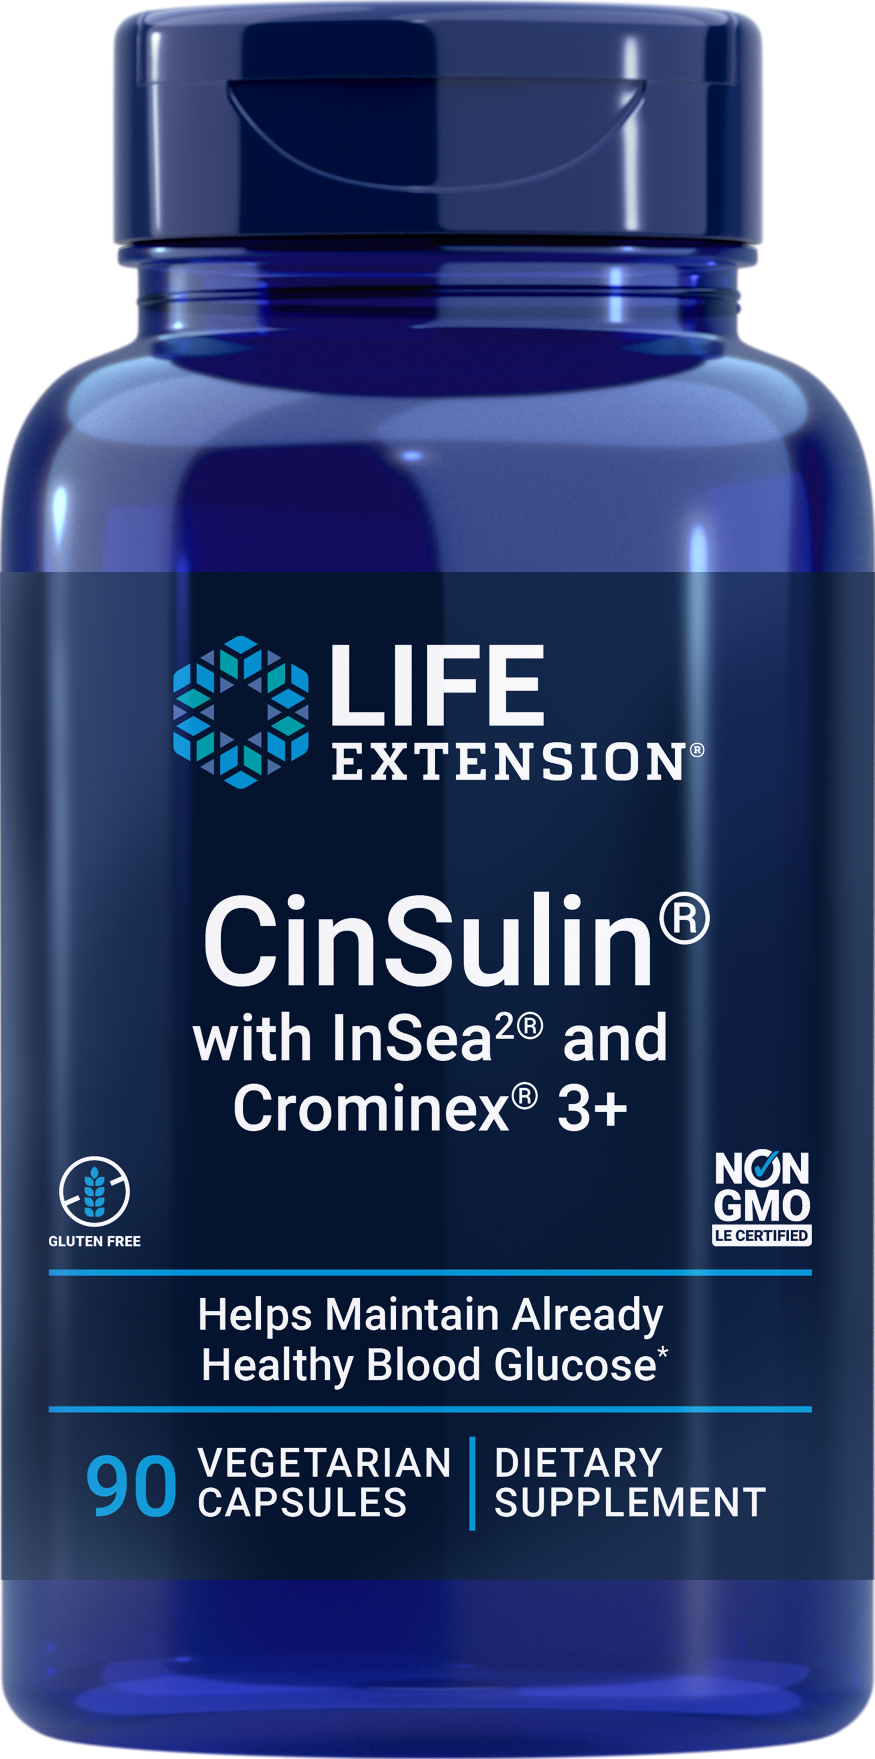 CinSulin® with InSea2® and Crominex 3+®